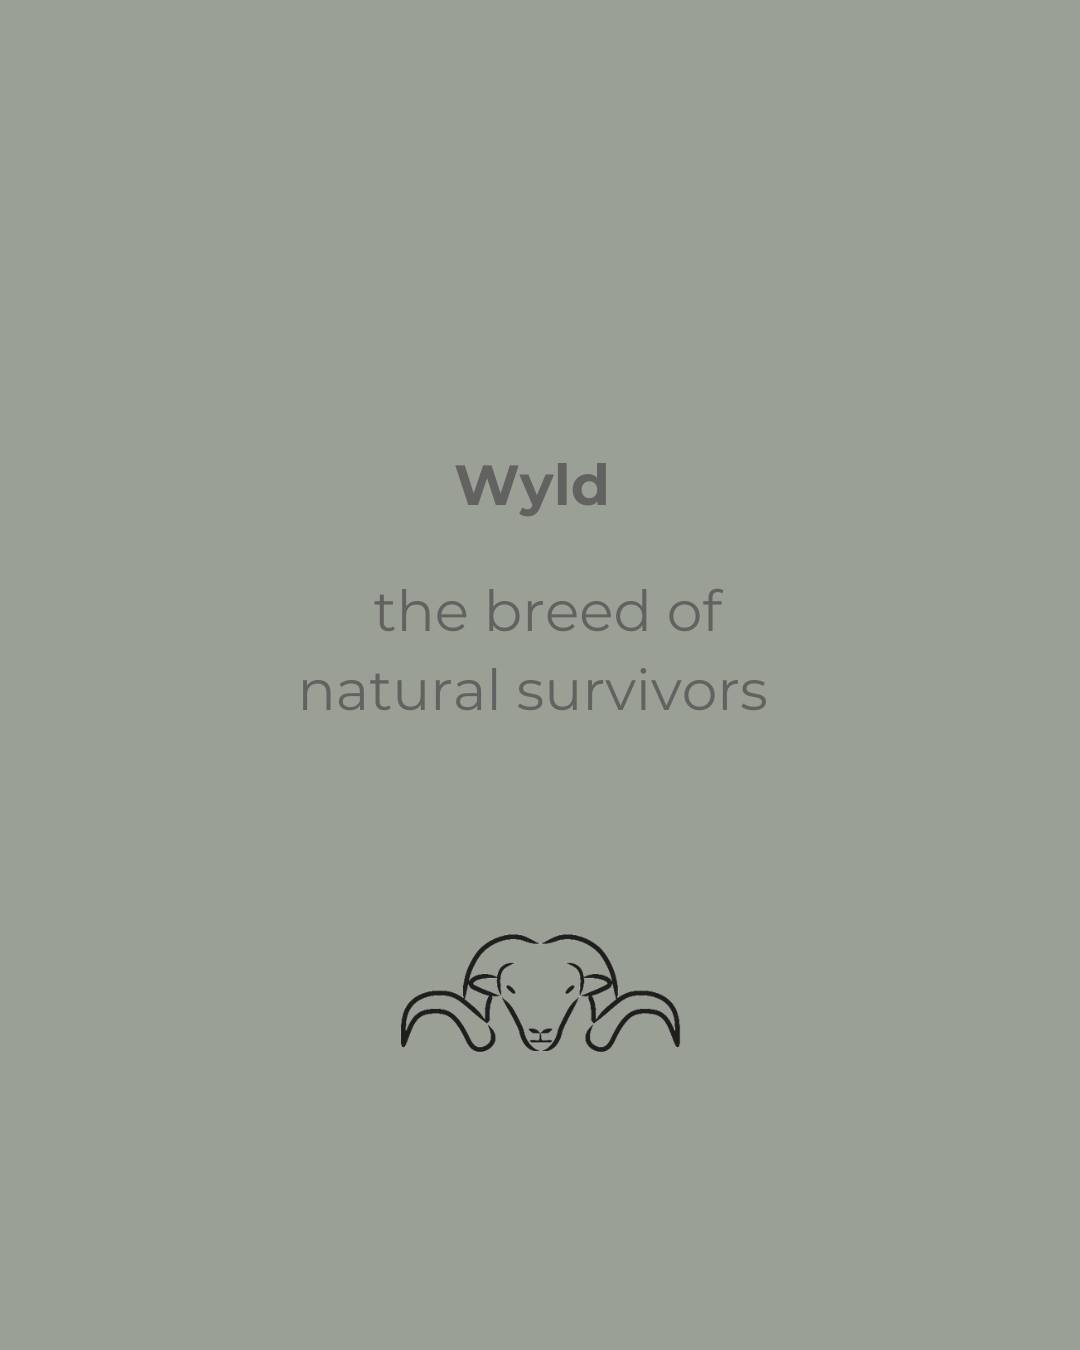 The name Wyld was chosen to reflect the link between the Pihepe&rsquo;s survival through Natural Selection and what man naturally selects in order to thrive.

Wyld garments mimic the natural fleeces of the Pihepe, which endure extreme conditions in t